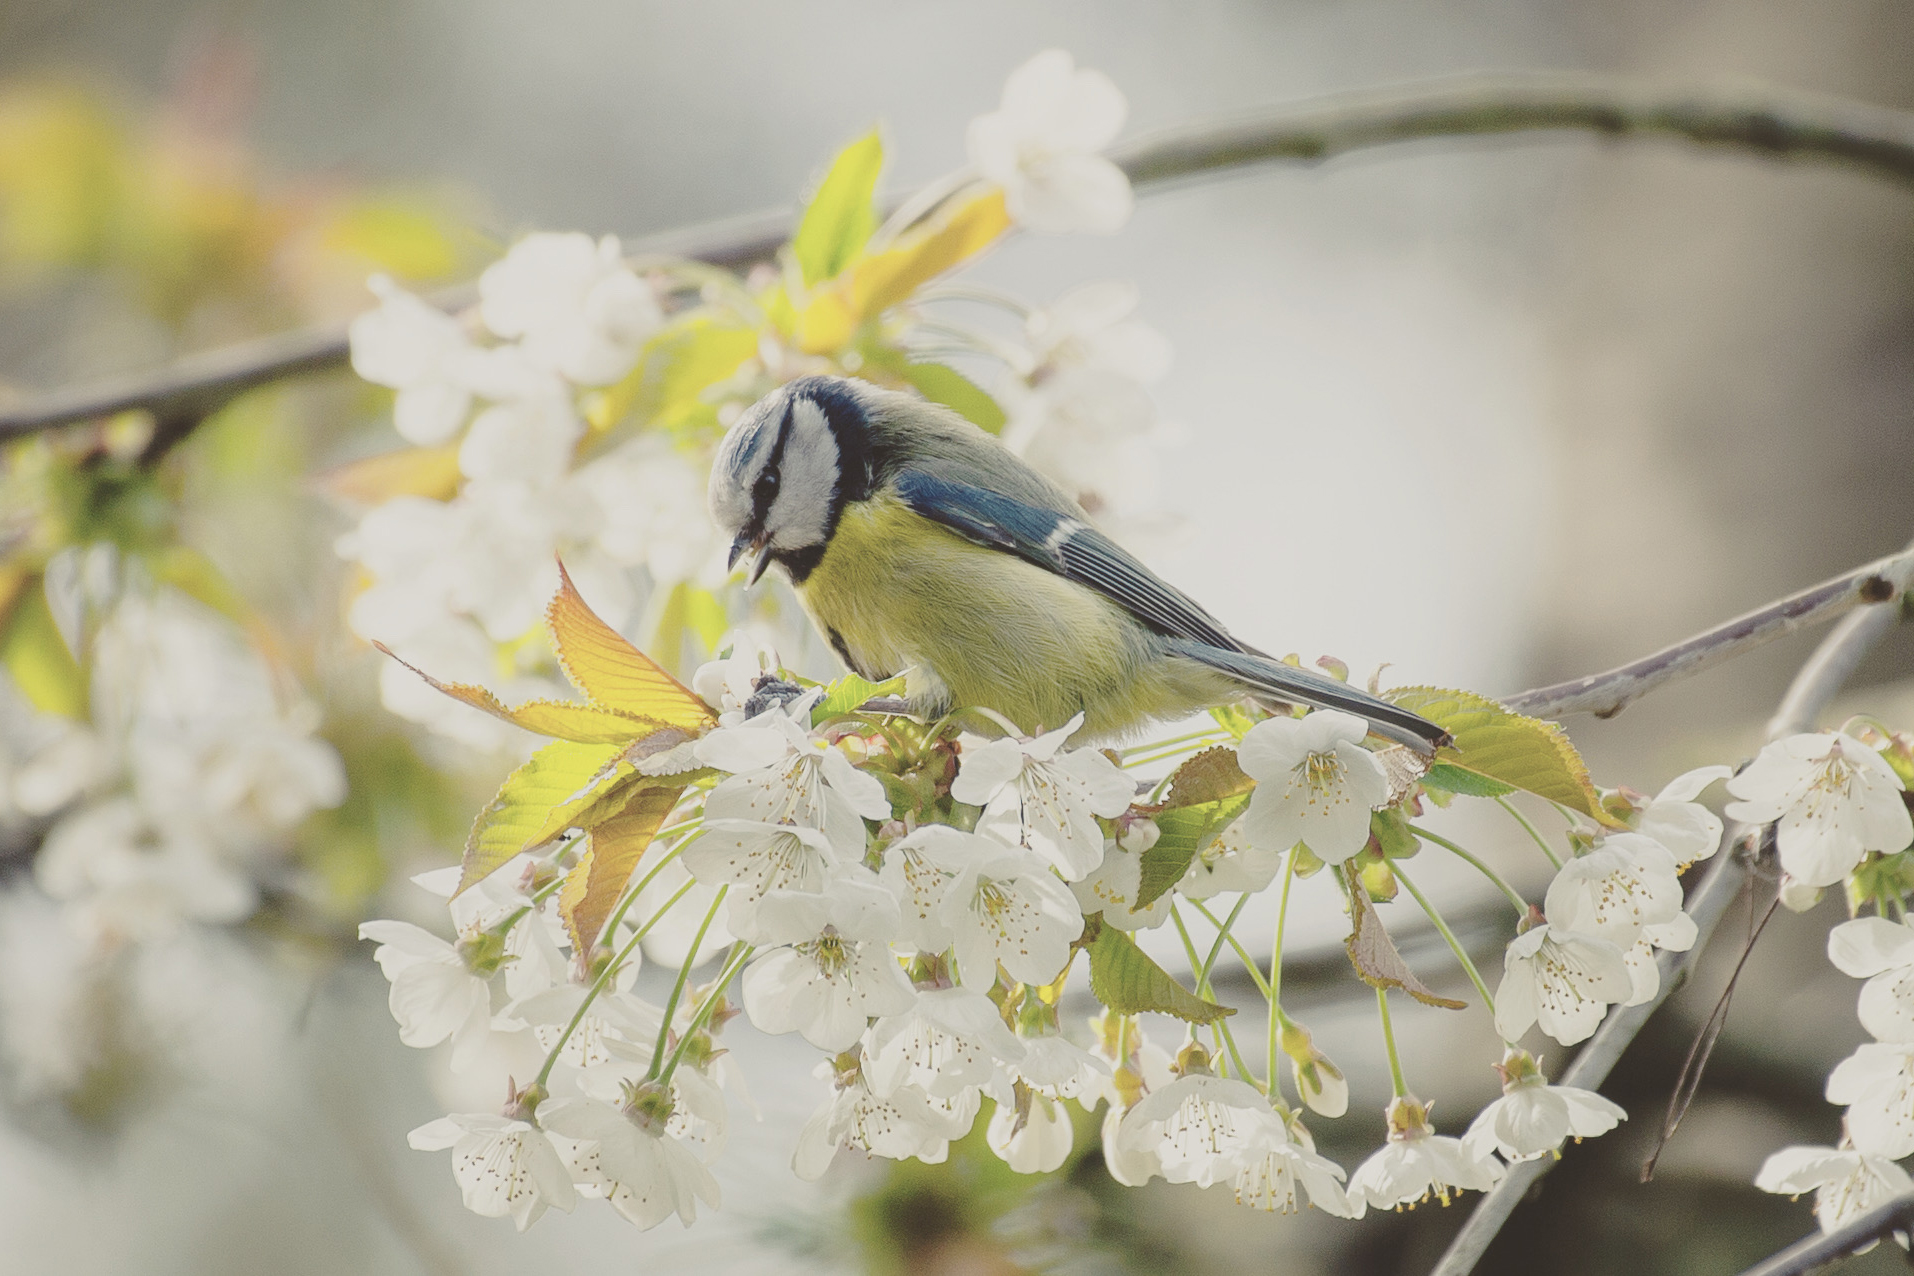 A bird on the branches of a tree with blossom on it